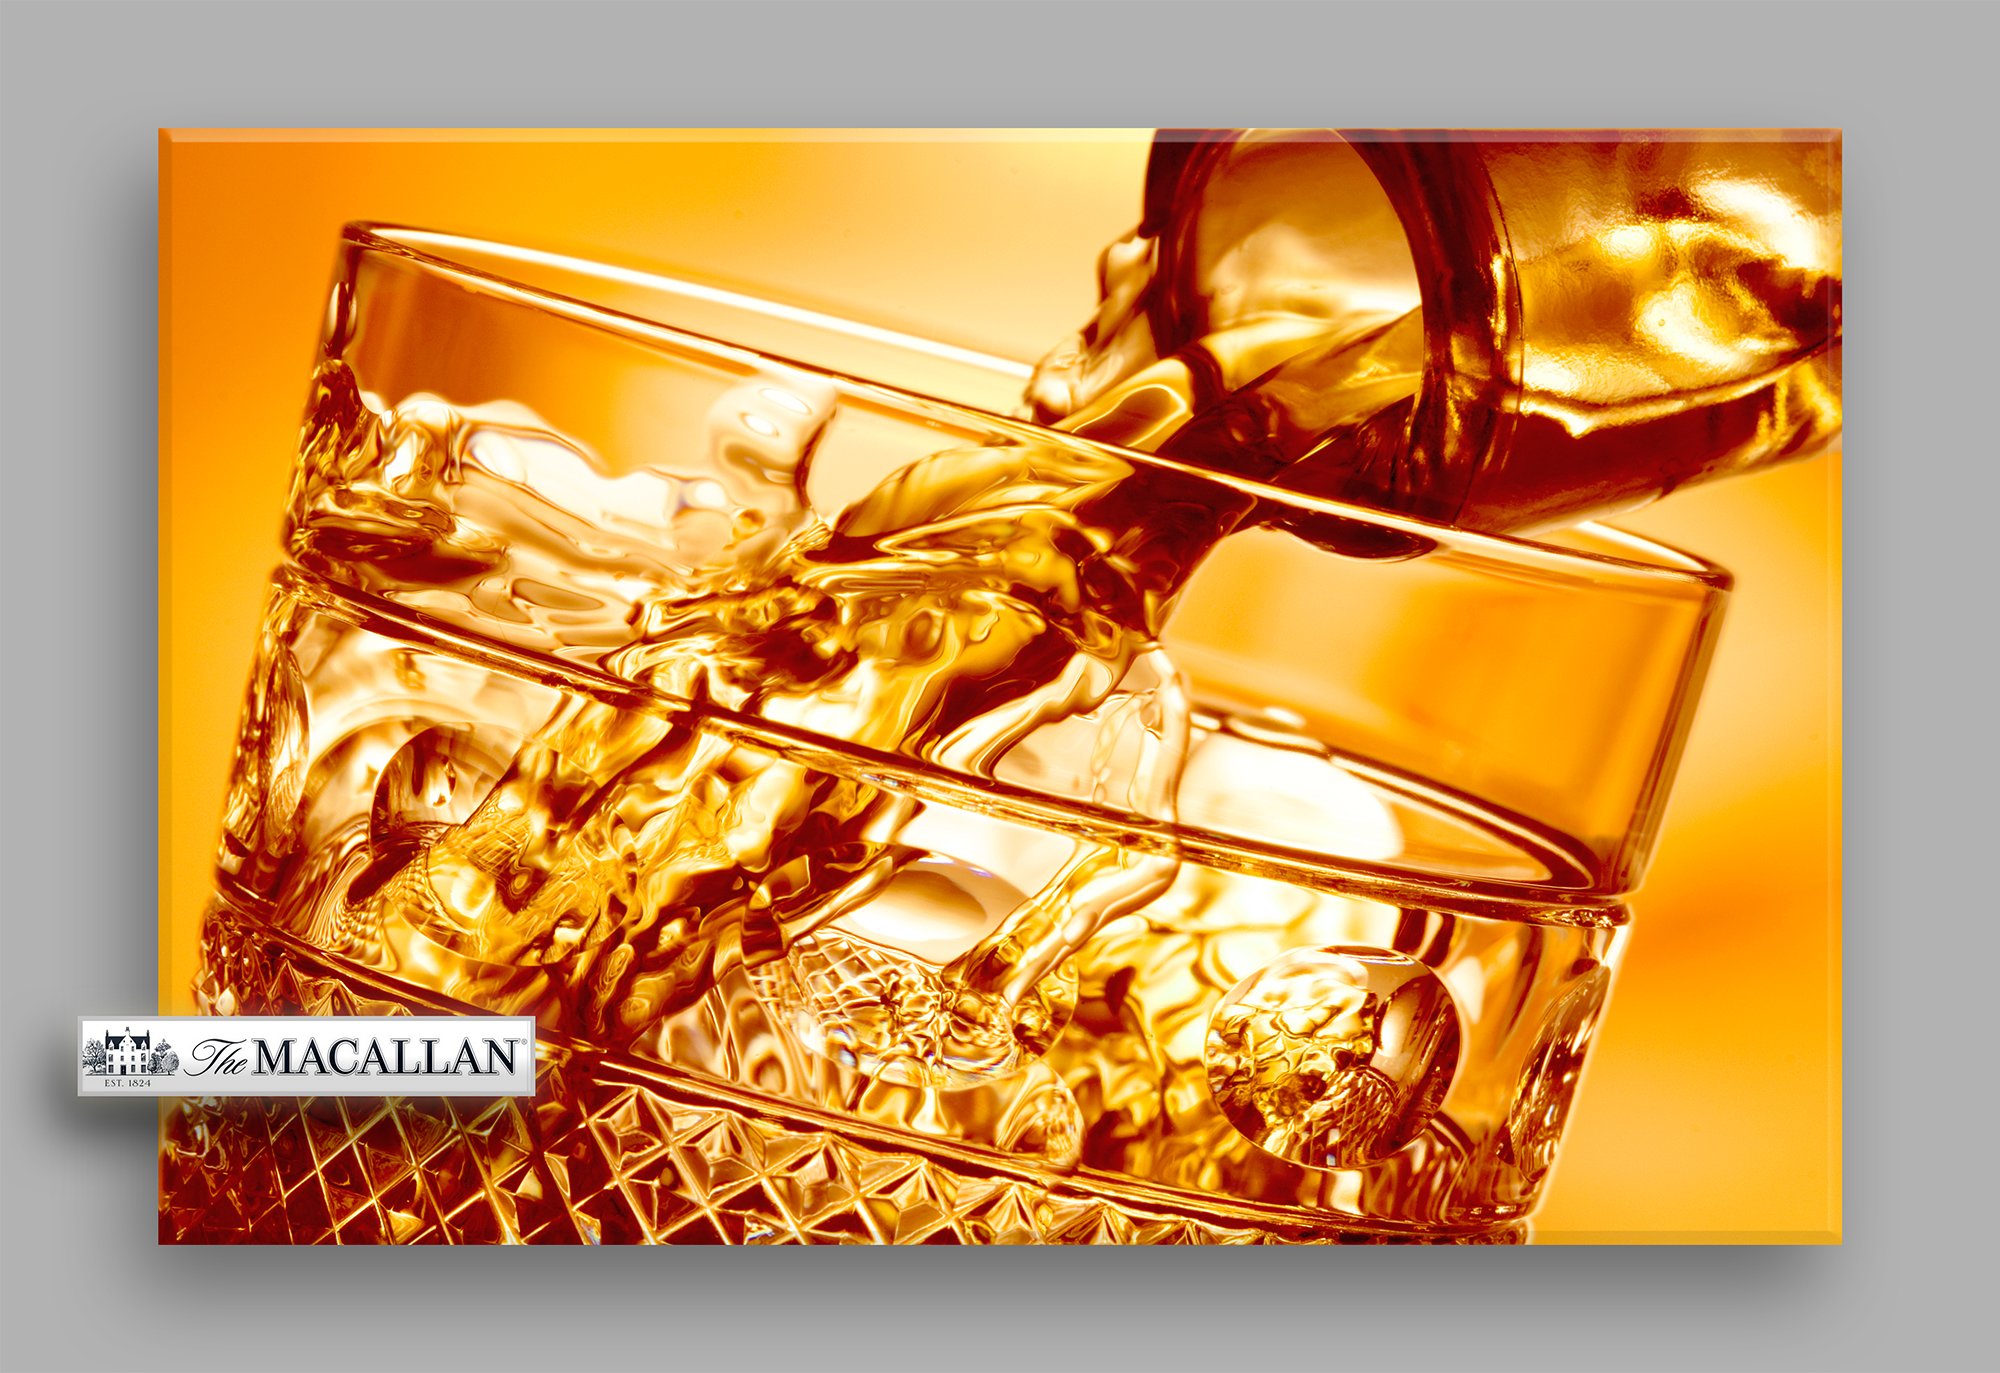 Advert for The Macallan.